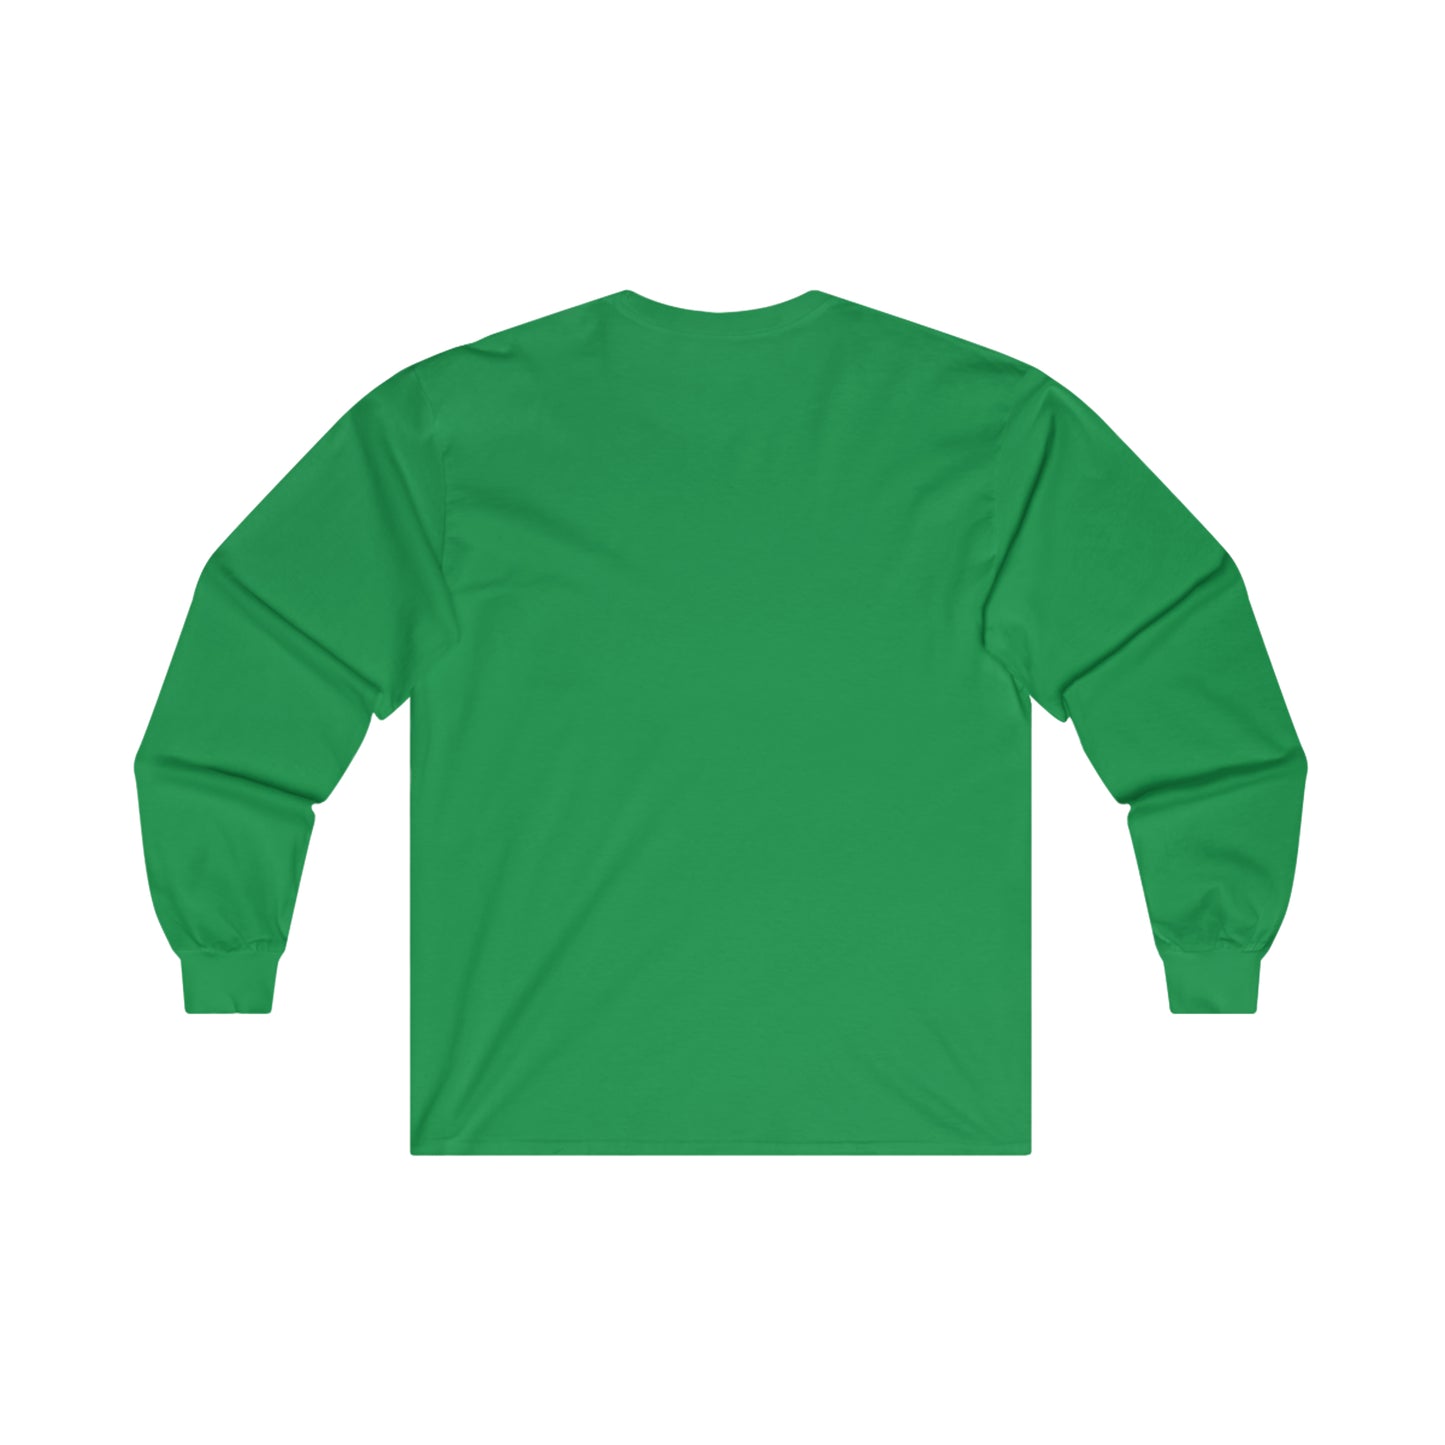 Gods Hand Tequila and Lime - Ultra Cotton Long Sleeve Tee